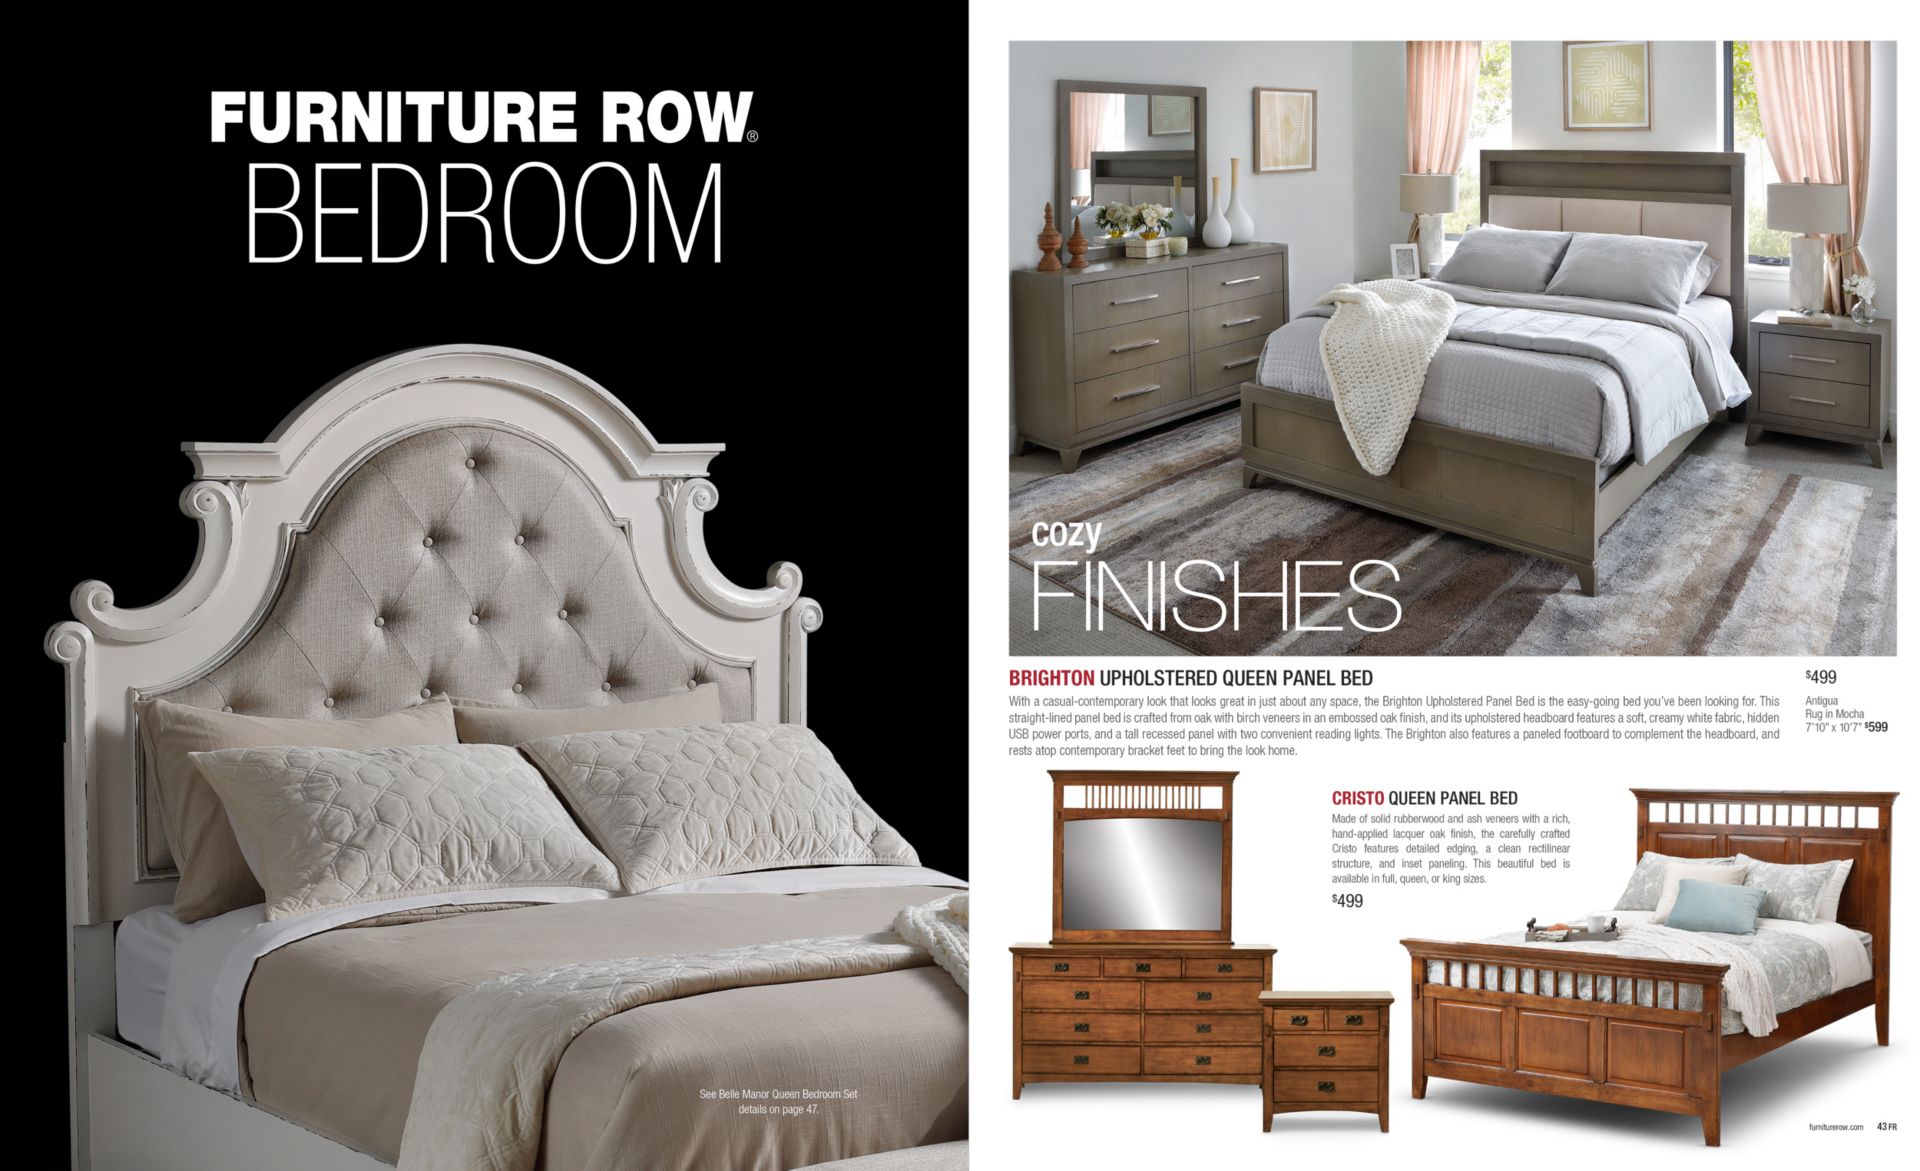 Furniture Row Bedroom. Cozy Finishes. BRIGHTON UPHOLSTERED QUEEN PANEL BED With a casual-contemporary look that looks great in just about any space, the Brighton Upholstered Panel Bed is the easy-going bed you’ve been looking for. This straight-lined panel bed is crafted from oak with birch veneers in an embossed oak finish, and its upholstered headboard features a soft, creamy white fabric, hidden USB power ports, and a tall recessed panel with two convenient reading lights. The Brighton also features a paneled footboard to complement the headboard, and rests atop contemporary bracket feet to bring the look home. CRISTO QUEEN PANEL BED $499 Made of solid rubberwood and ash veneers with a rich, hand-applied lacquer oak finish, the carefully crafted Cristo features detailed edging, a clean rectilinear structure, and inset paneling. This beautiful bed is available in full, queen, or king sizes.